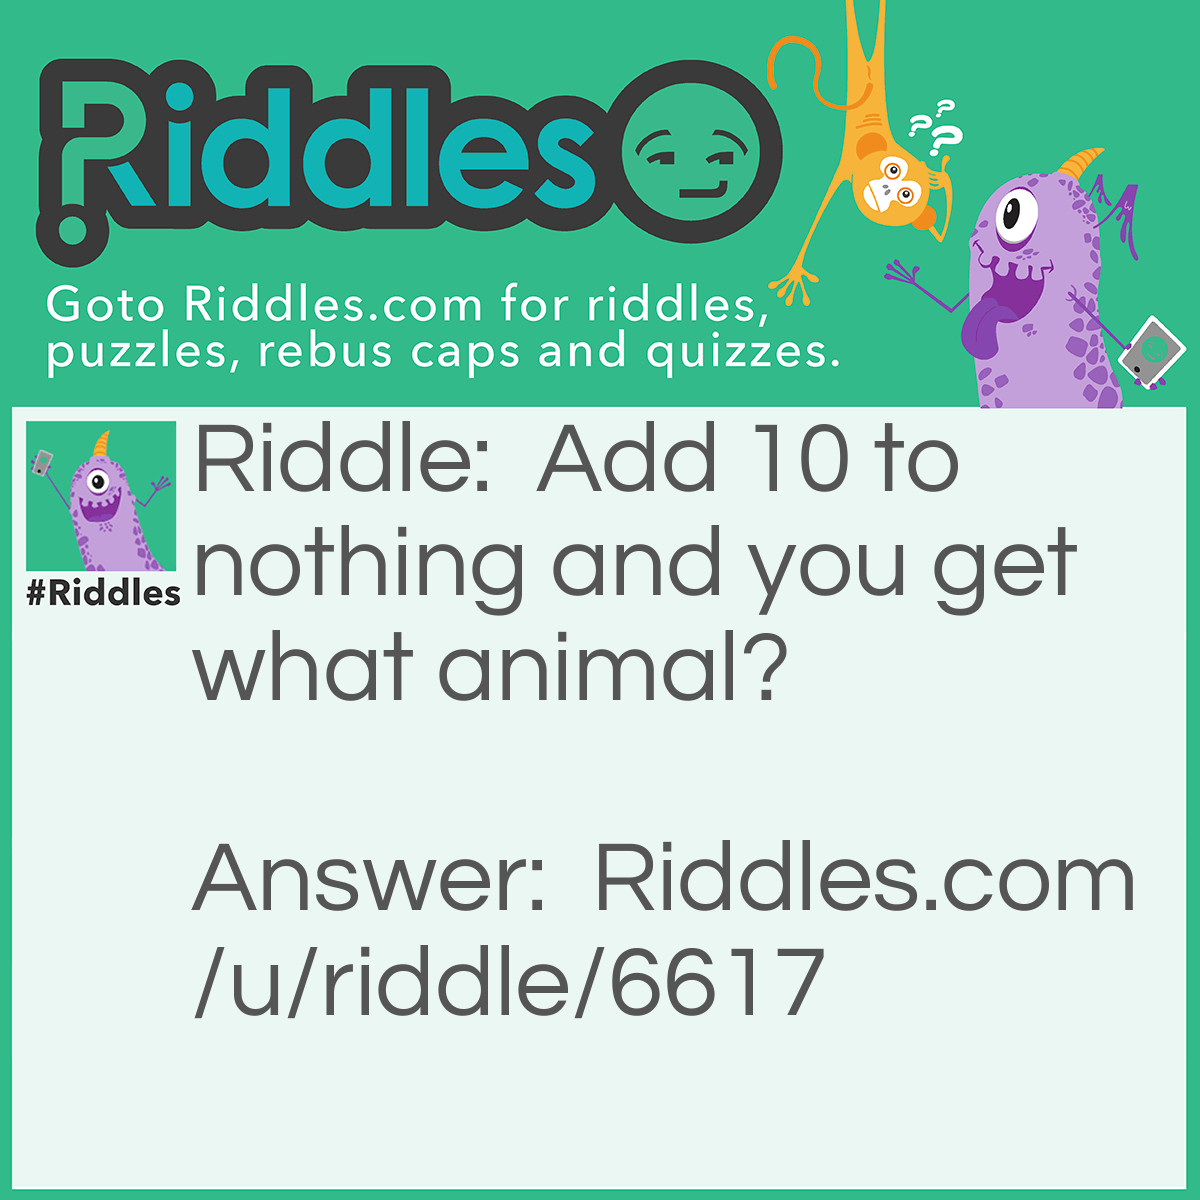 Riddle: Add 10 to nothing and you get what animal? Answer: I DON'T KNOW (like seriously I have no idea please comment your thoughts on what the answer is with an explanation)